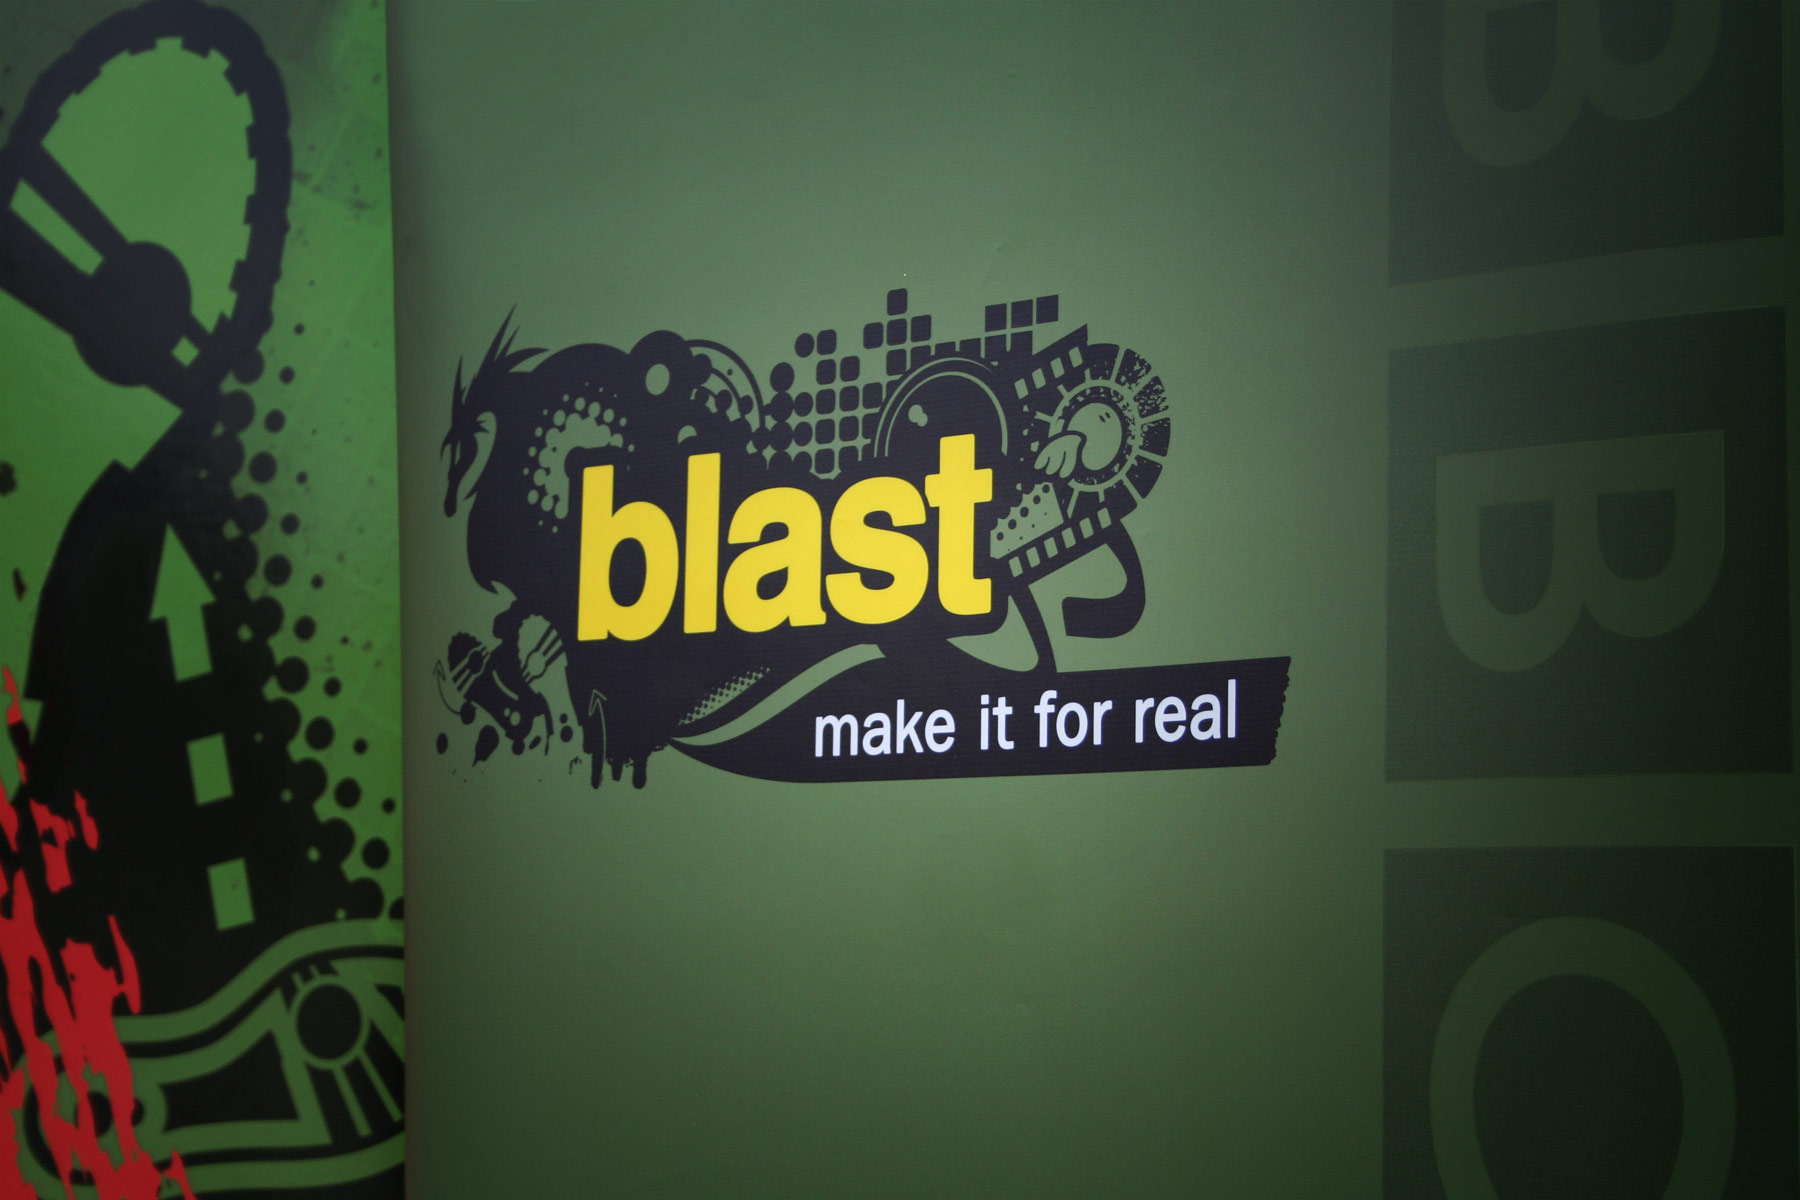 The primary brand application contained a strong Blast wordmark rendered in a suite of hifi colours.